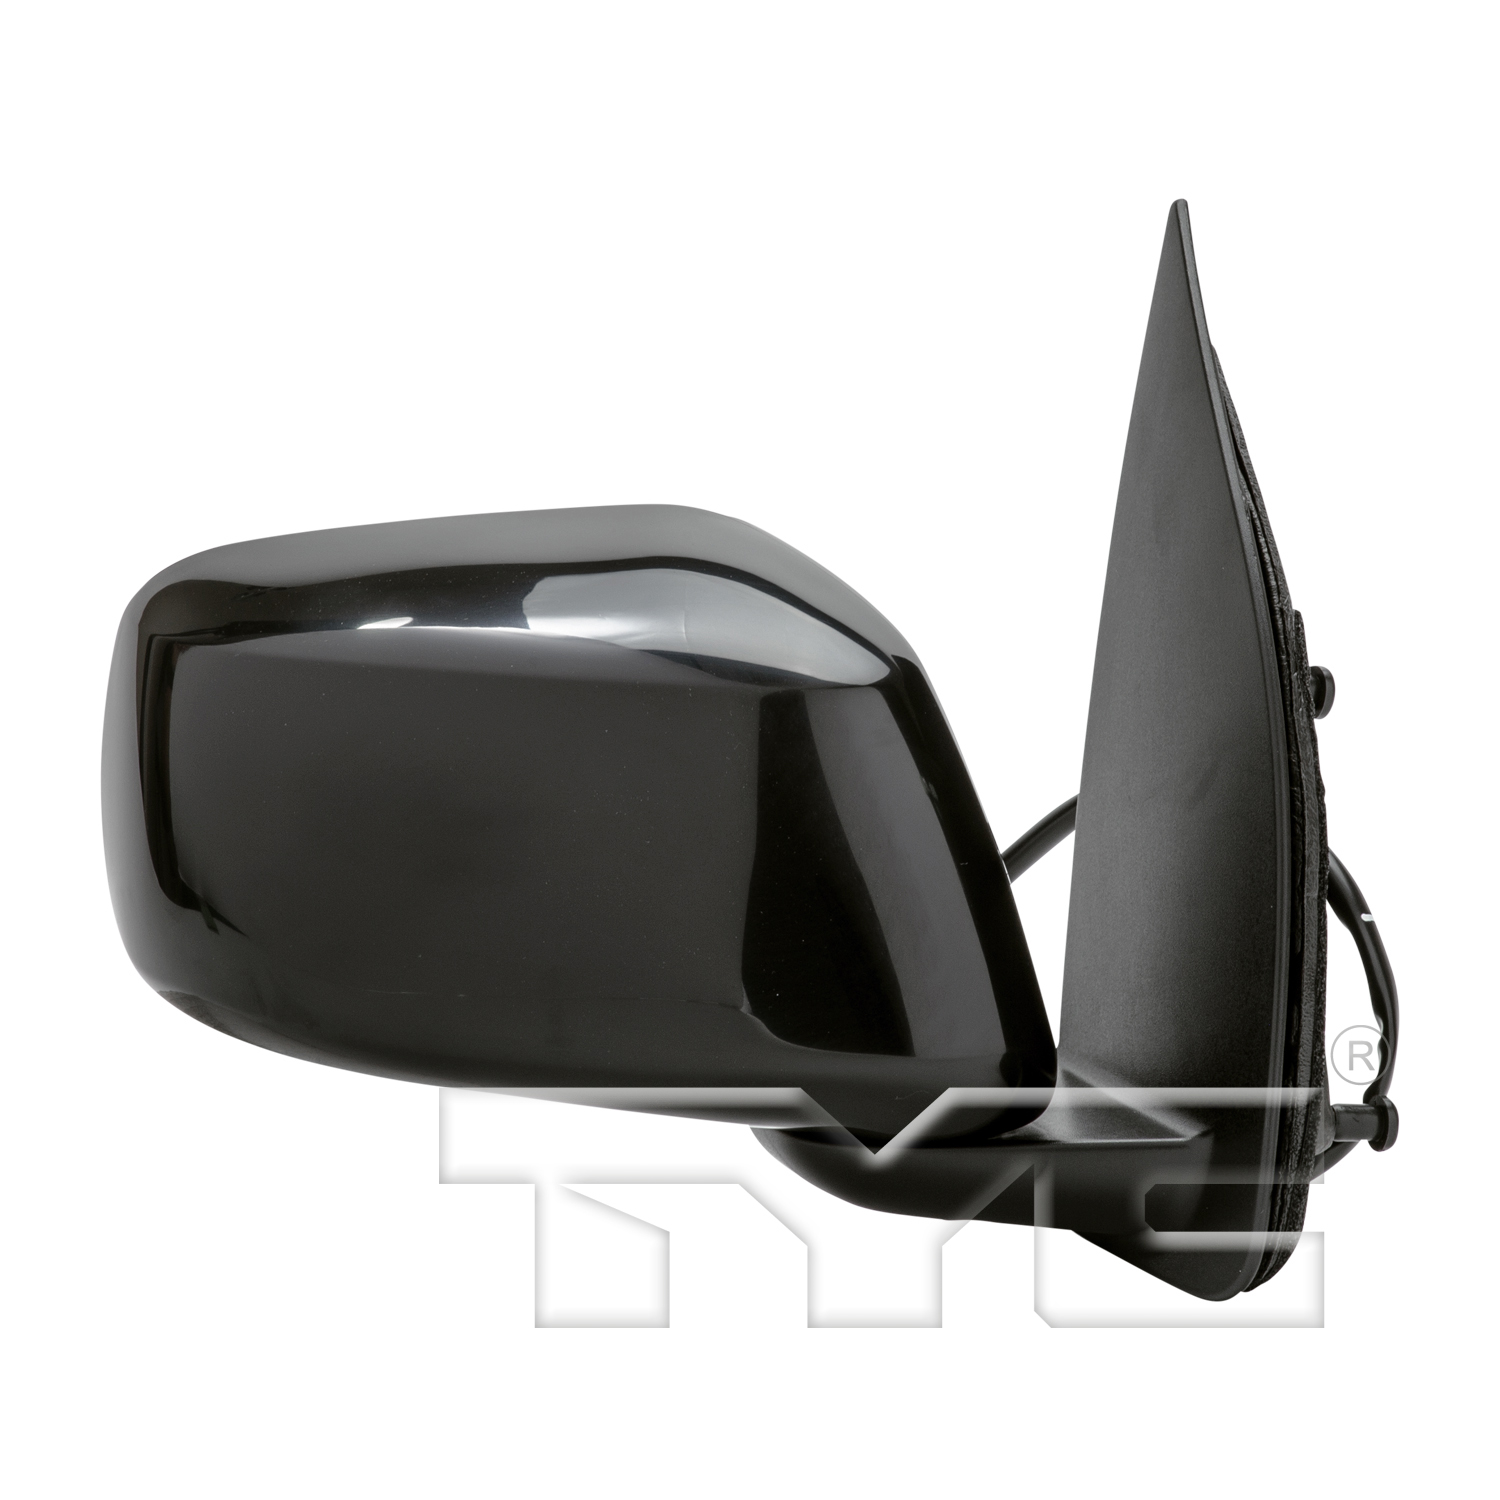 Aftermarket MIRRORS for NISSAN - PATHFINDER, PATHFINDER,05-12,RT Mirror outside rear view